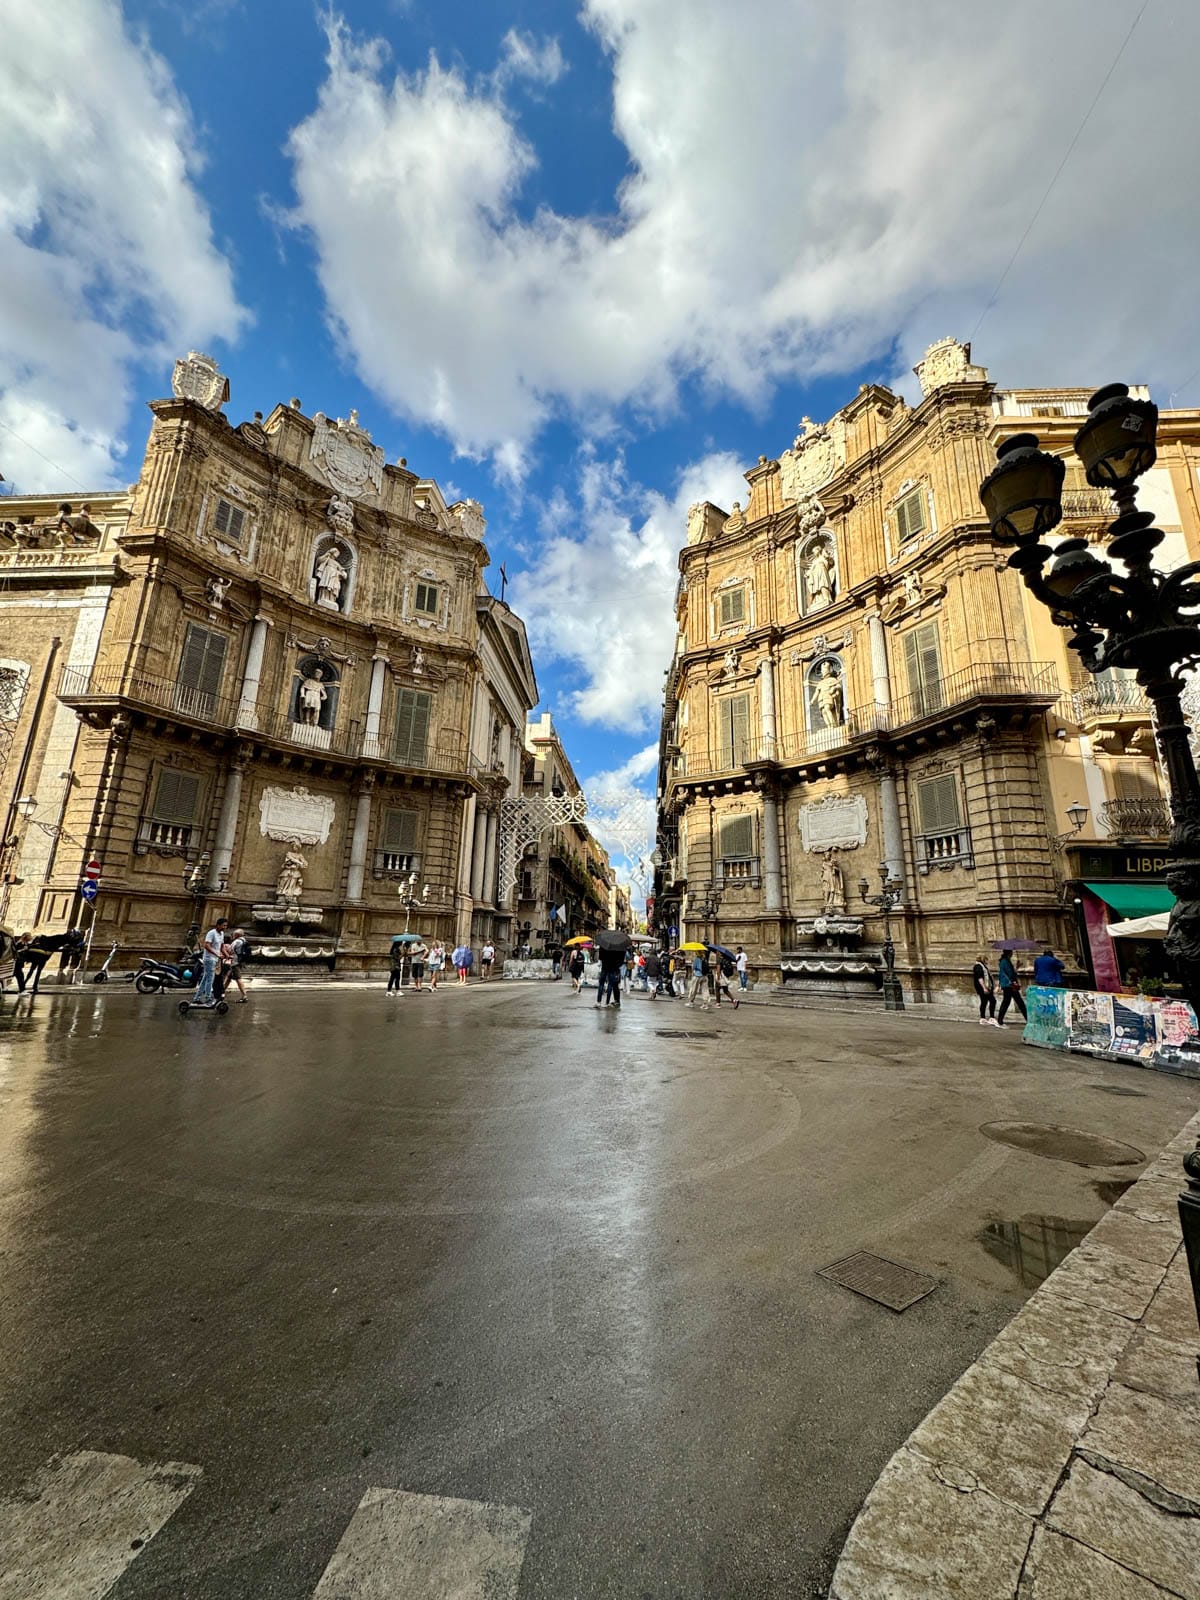 Square with historic old buildings in Palermo Italy.